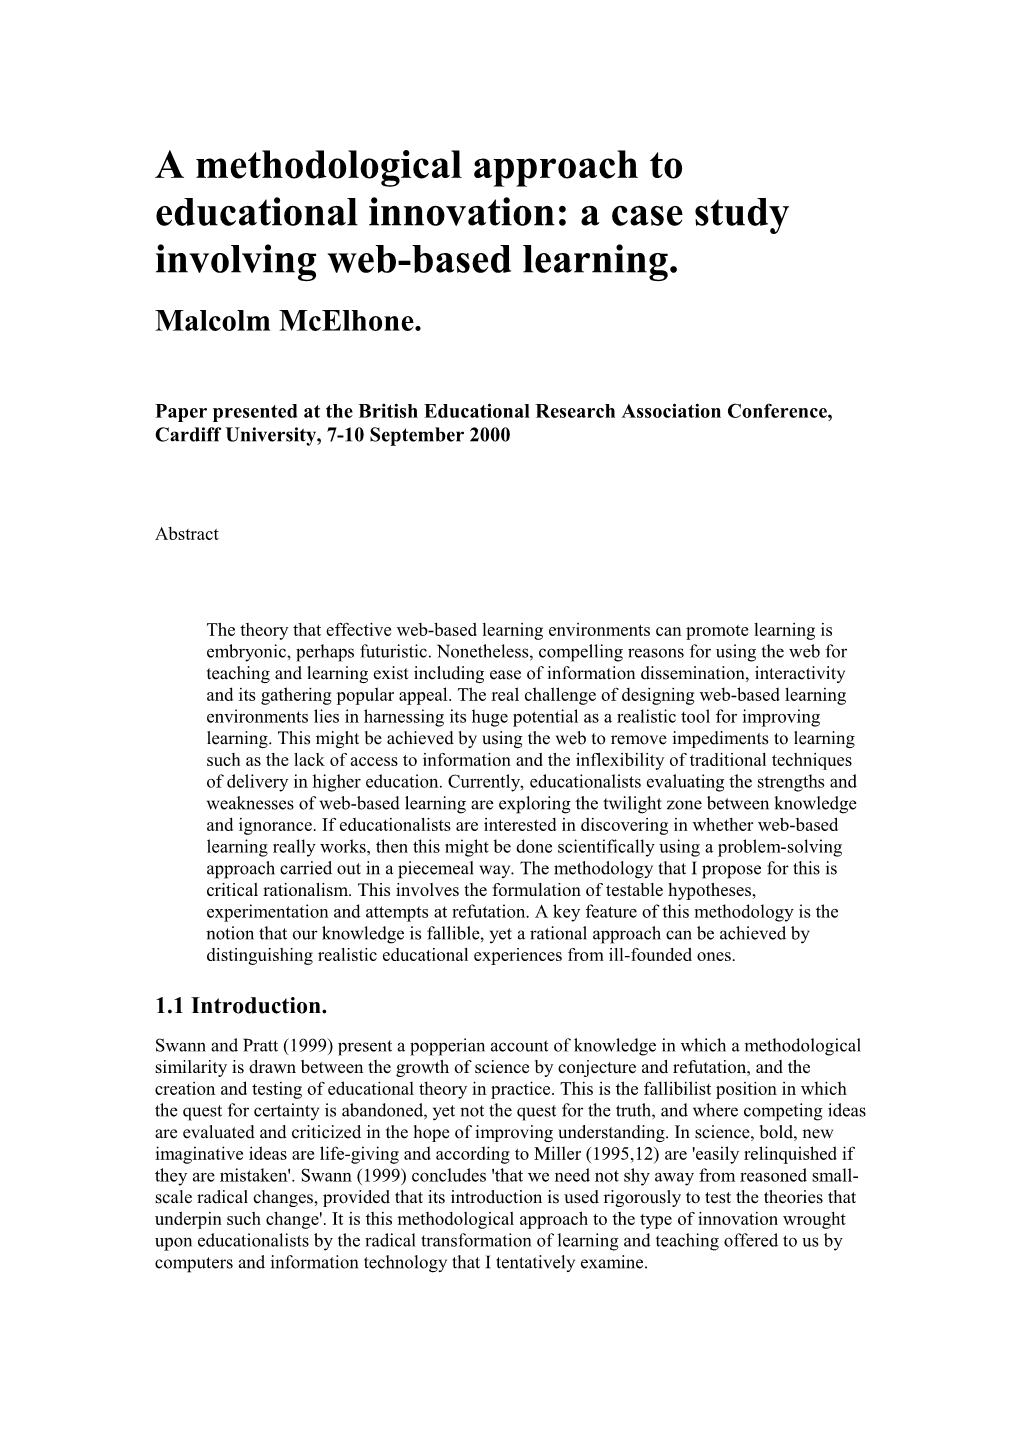 A Methodological Approach to Educational Innovation: a Case Study Involving Web-Based Learning